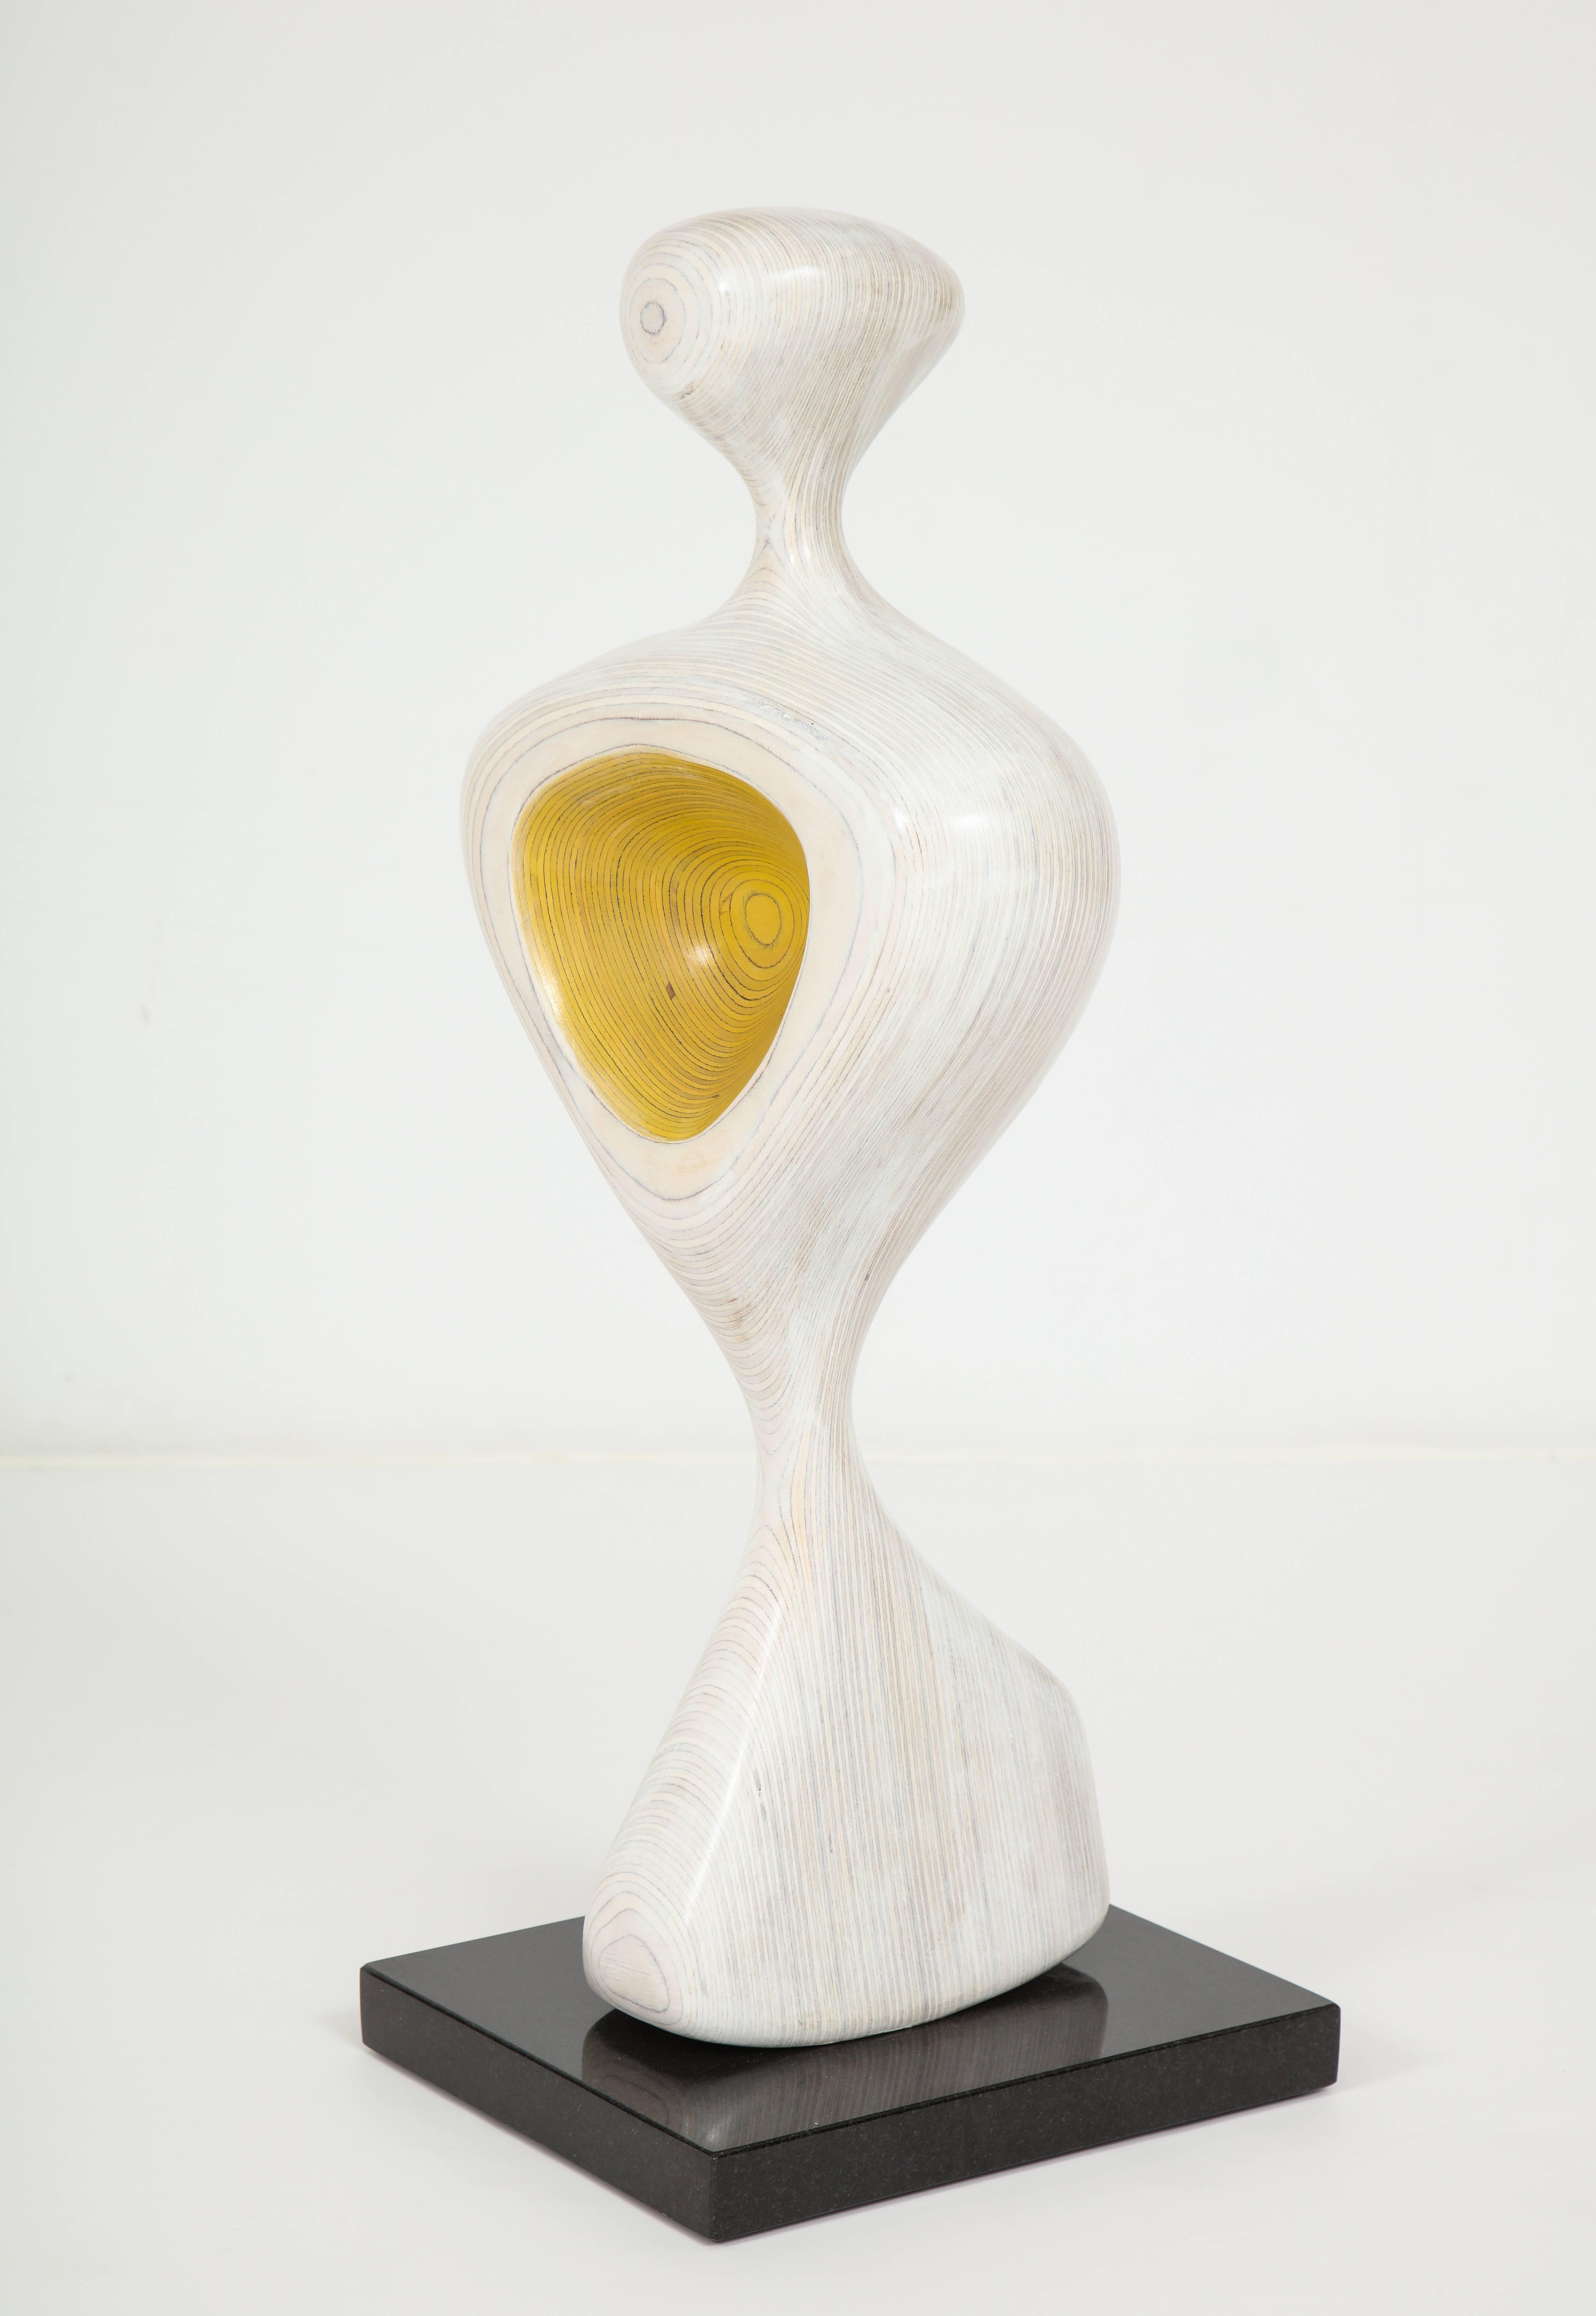 'Spoon' by Dick Shanley 
Laminated birchwood abstract sculpture on granite base. 
Size: 24